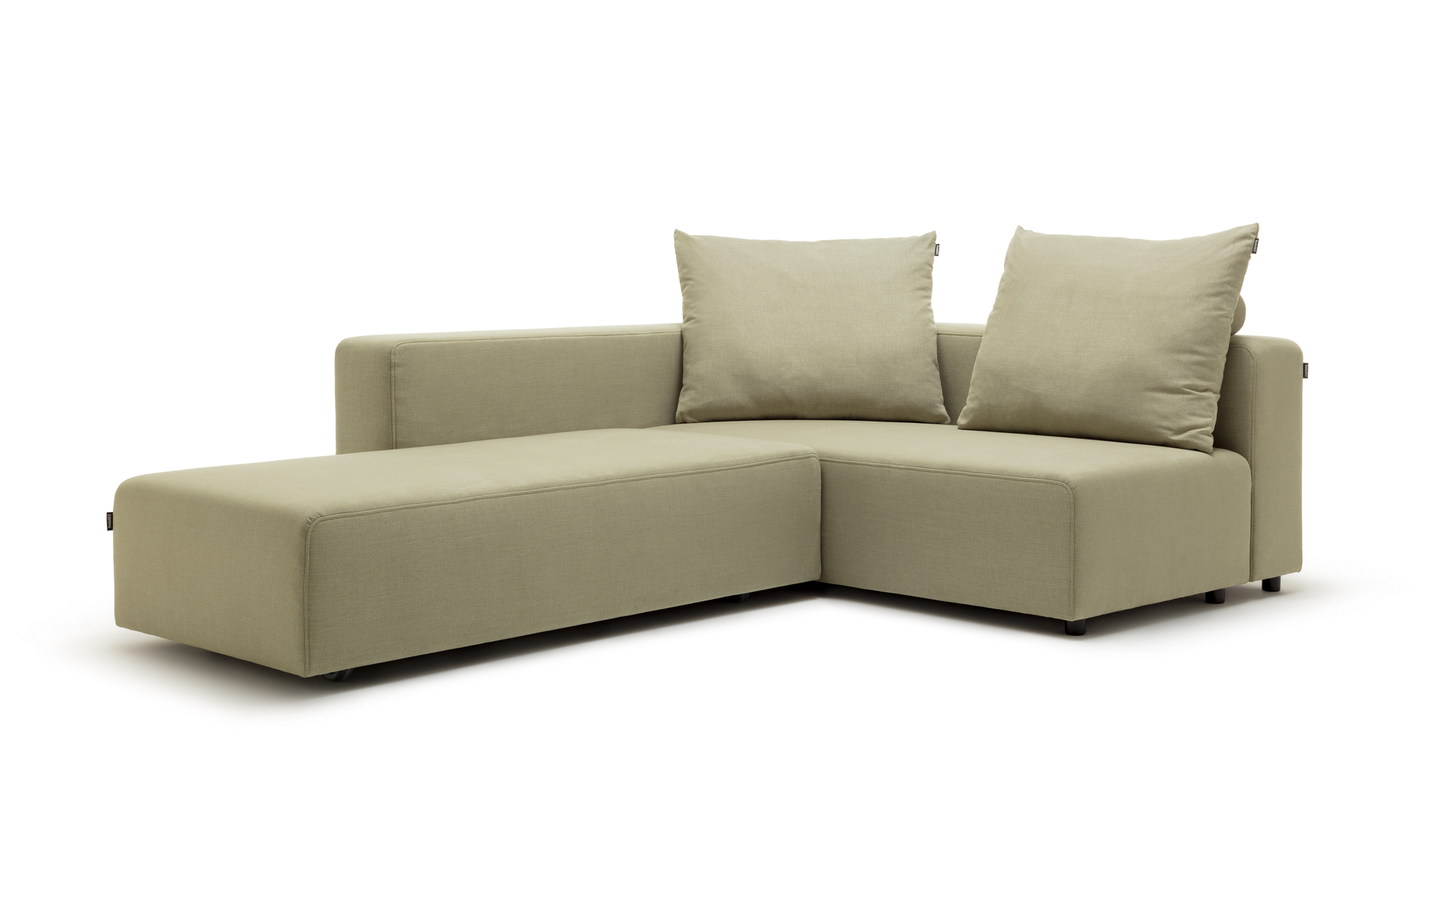 Freistil by Rolf Benz 137 Sectional Sofa / Sofa Bed